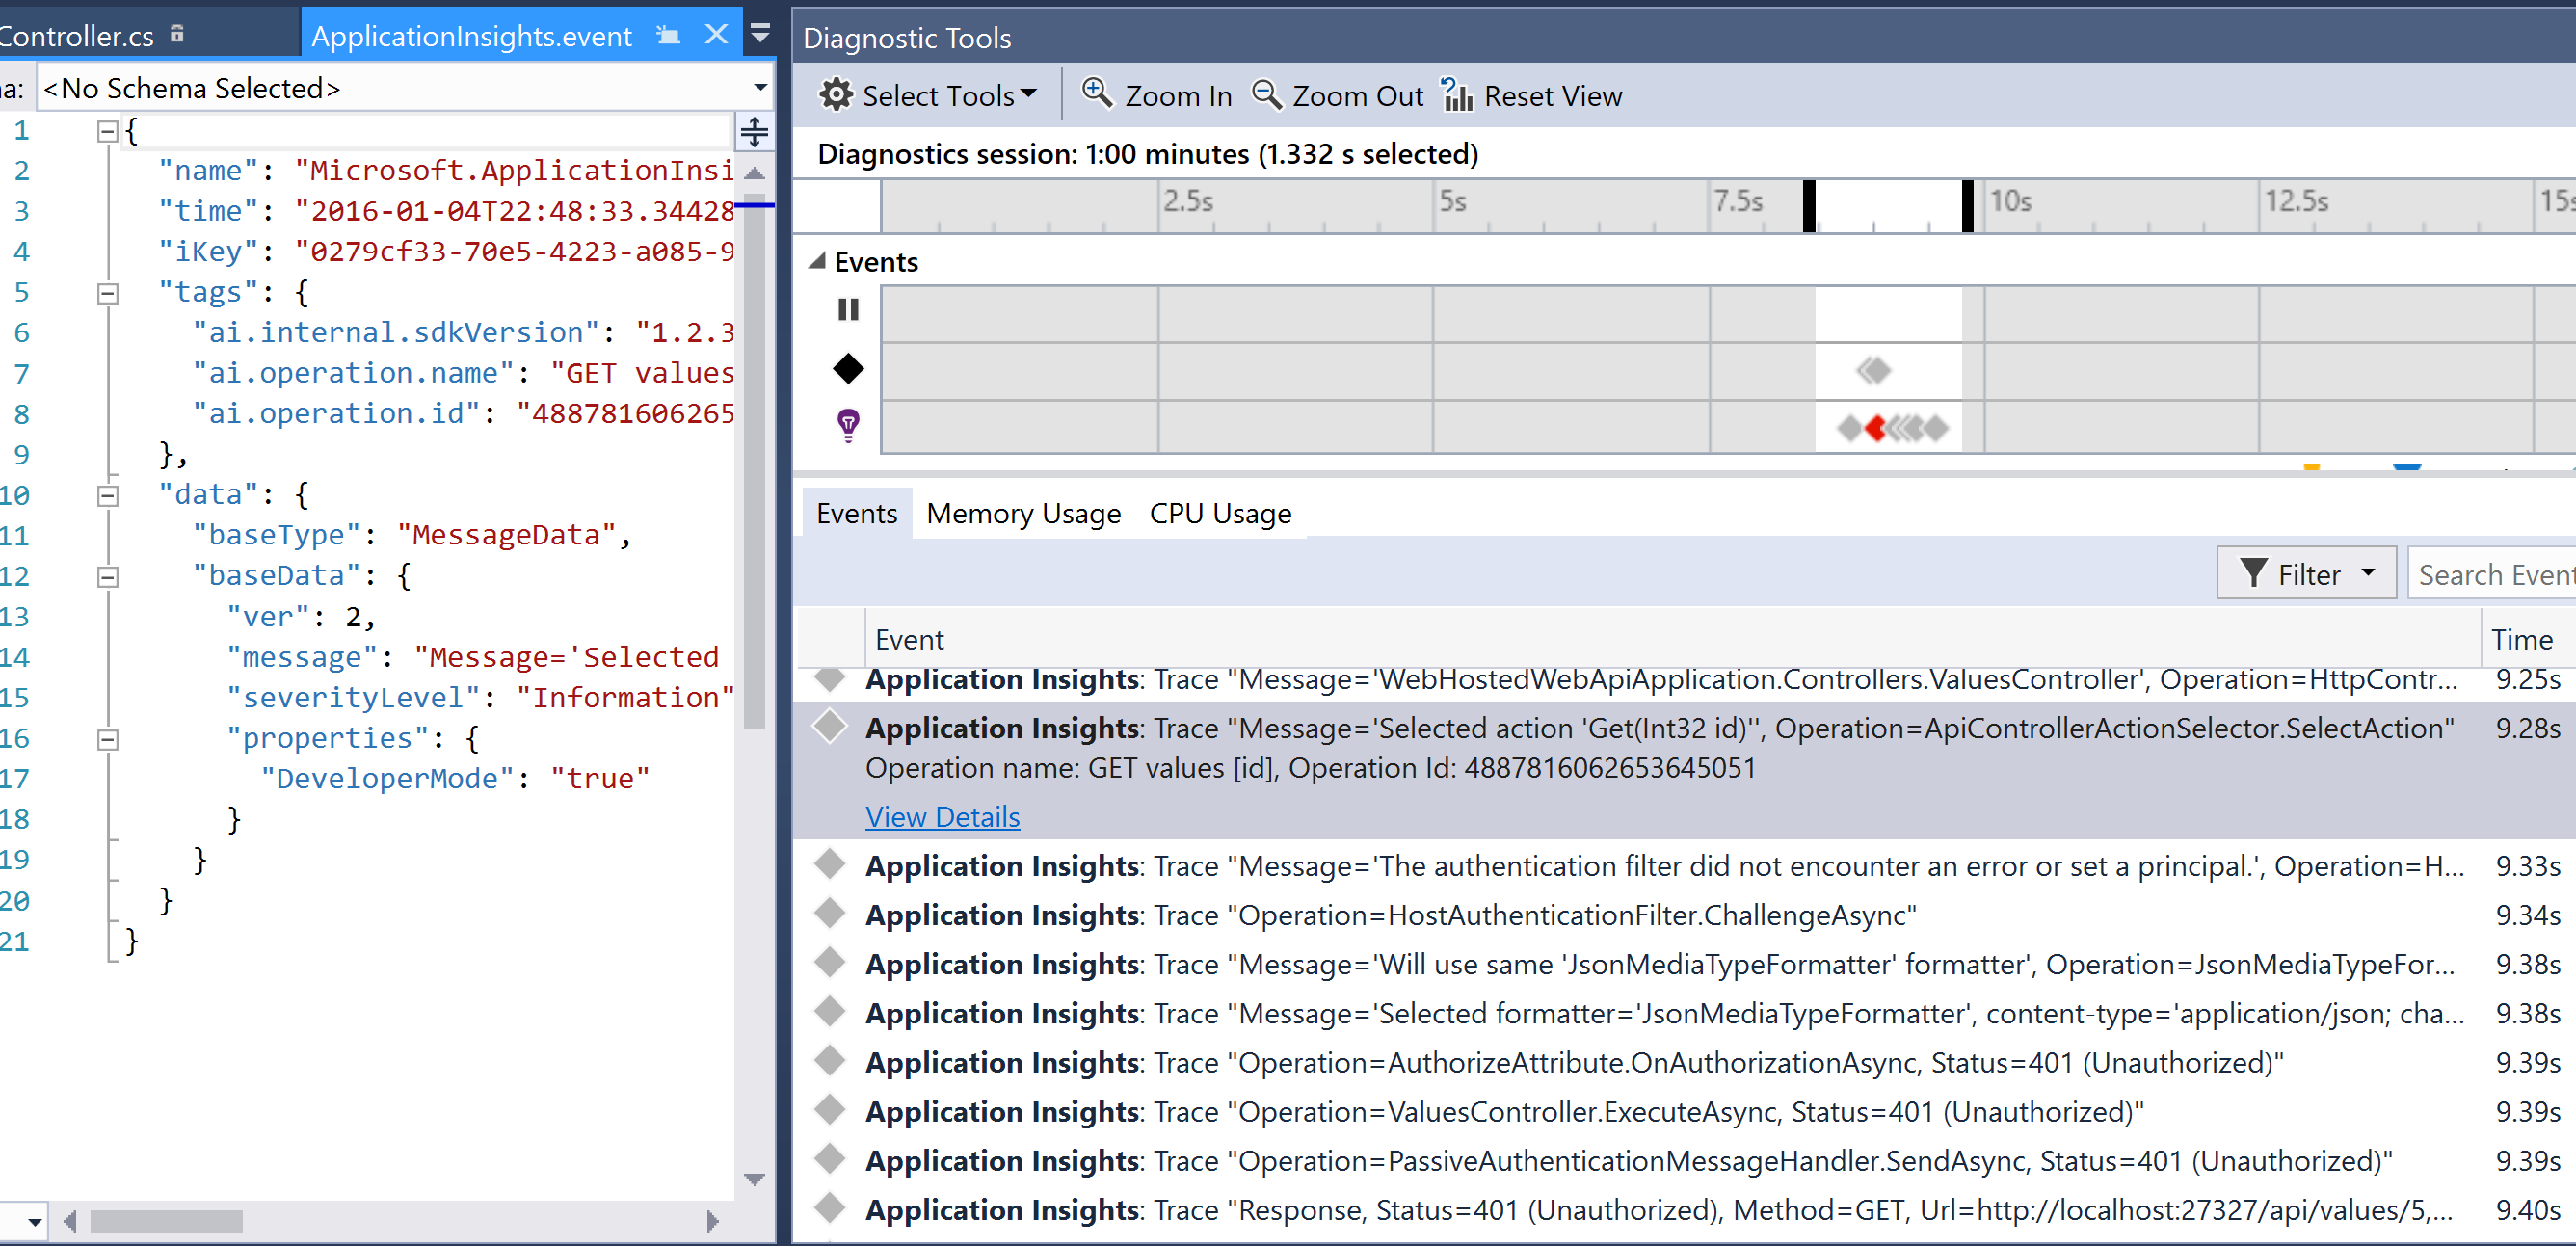 Application Insights trace in the Diagnostics Tools window